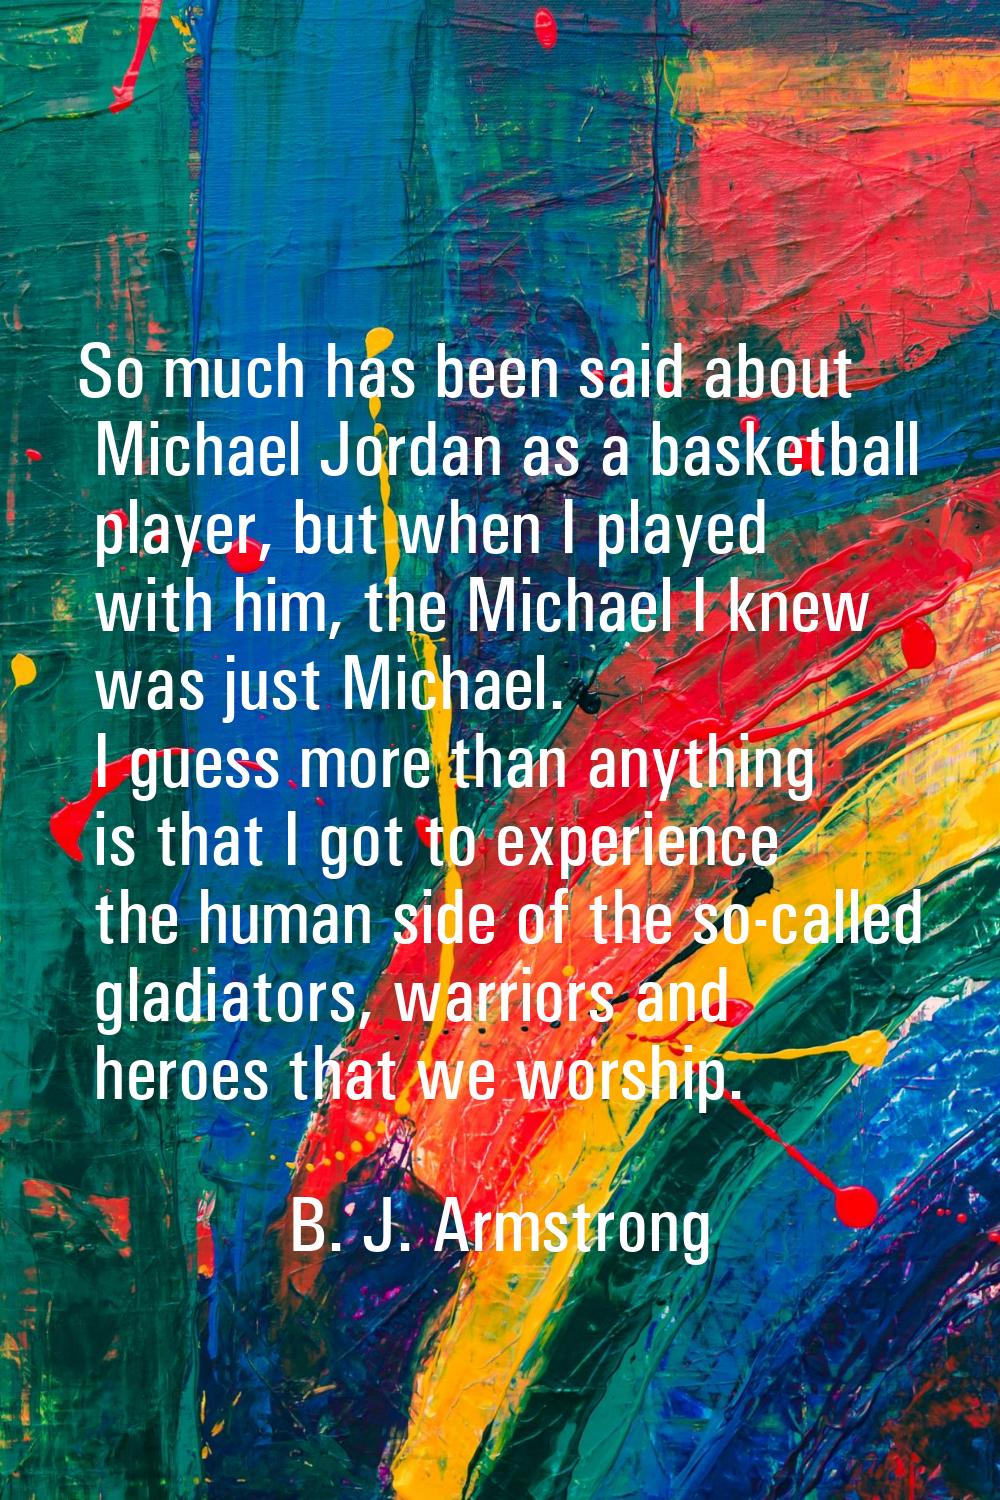 So much has been said about Michael Jordan as a basketball player, but when I played with him, the 